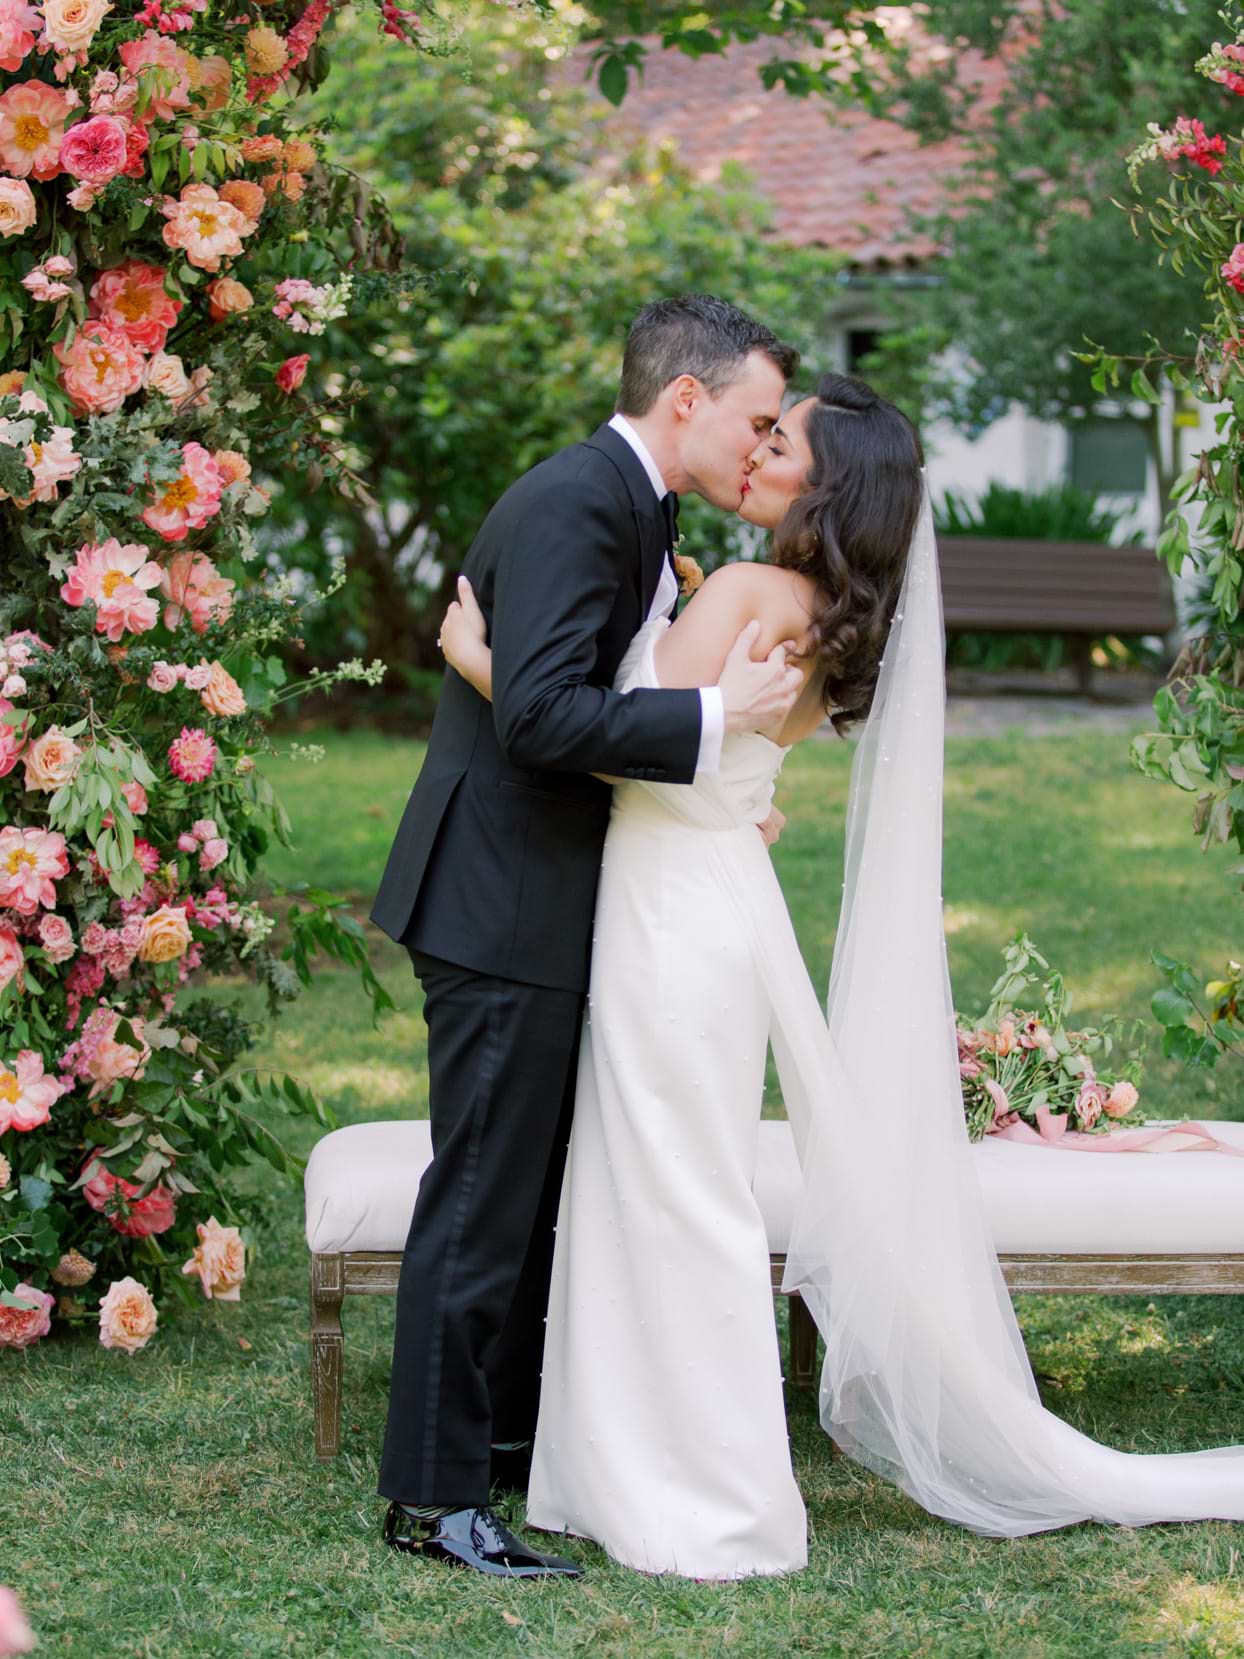 Bride and groom sharing their first kiss as husband and wife